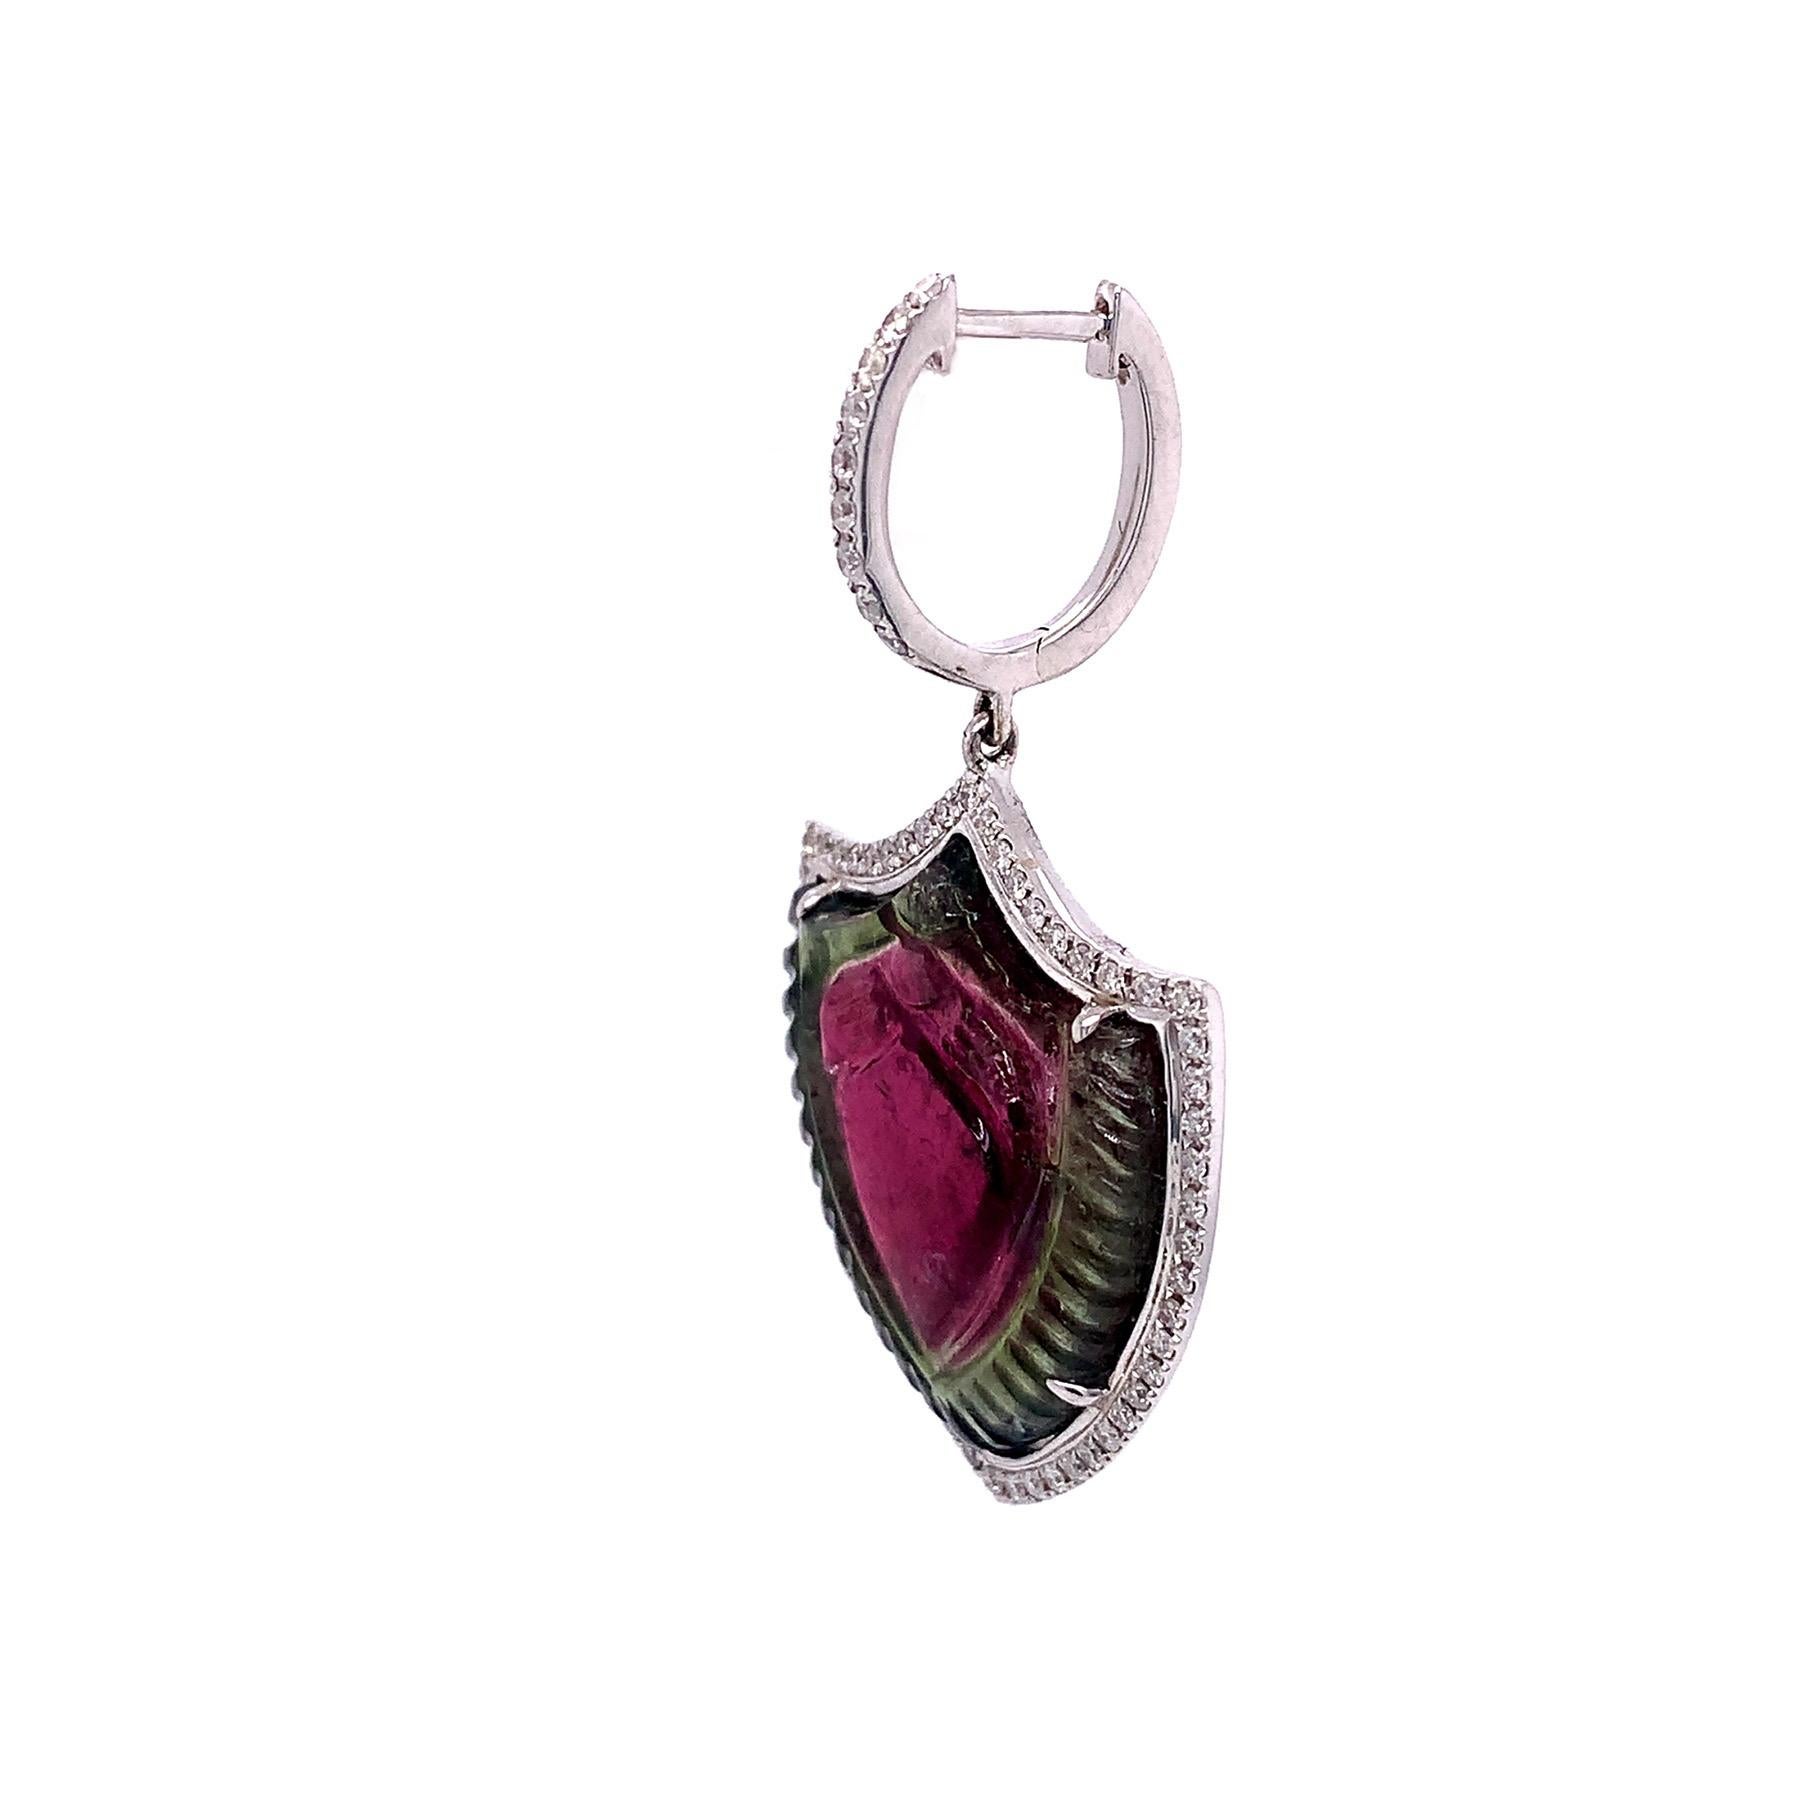 Exclusive Collection,

Bi-color tourmaline featuring shield shape with diamonds drop earring are set in 18k White gold.

Tourmaline: 26.06 ct total weight.
Diamond: 0.69 ct total weight.
All diamonds are G-H/SI stones.
